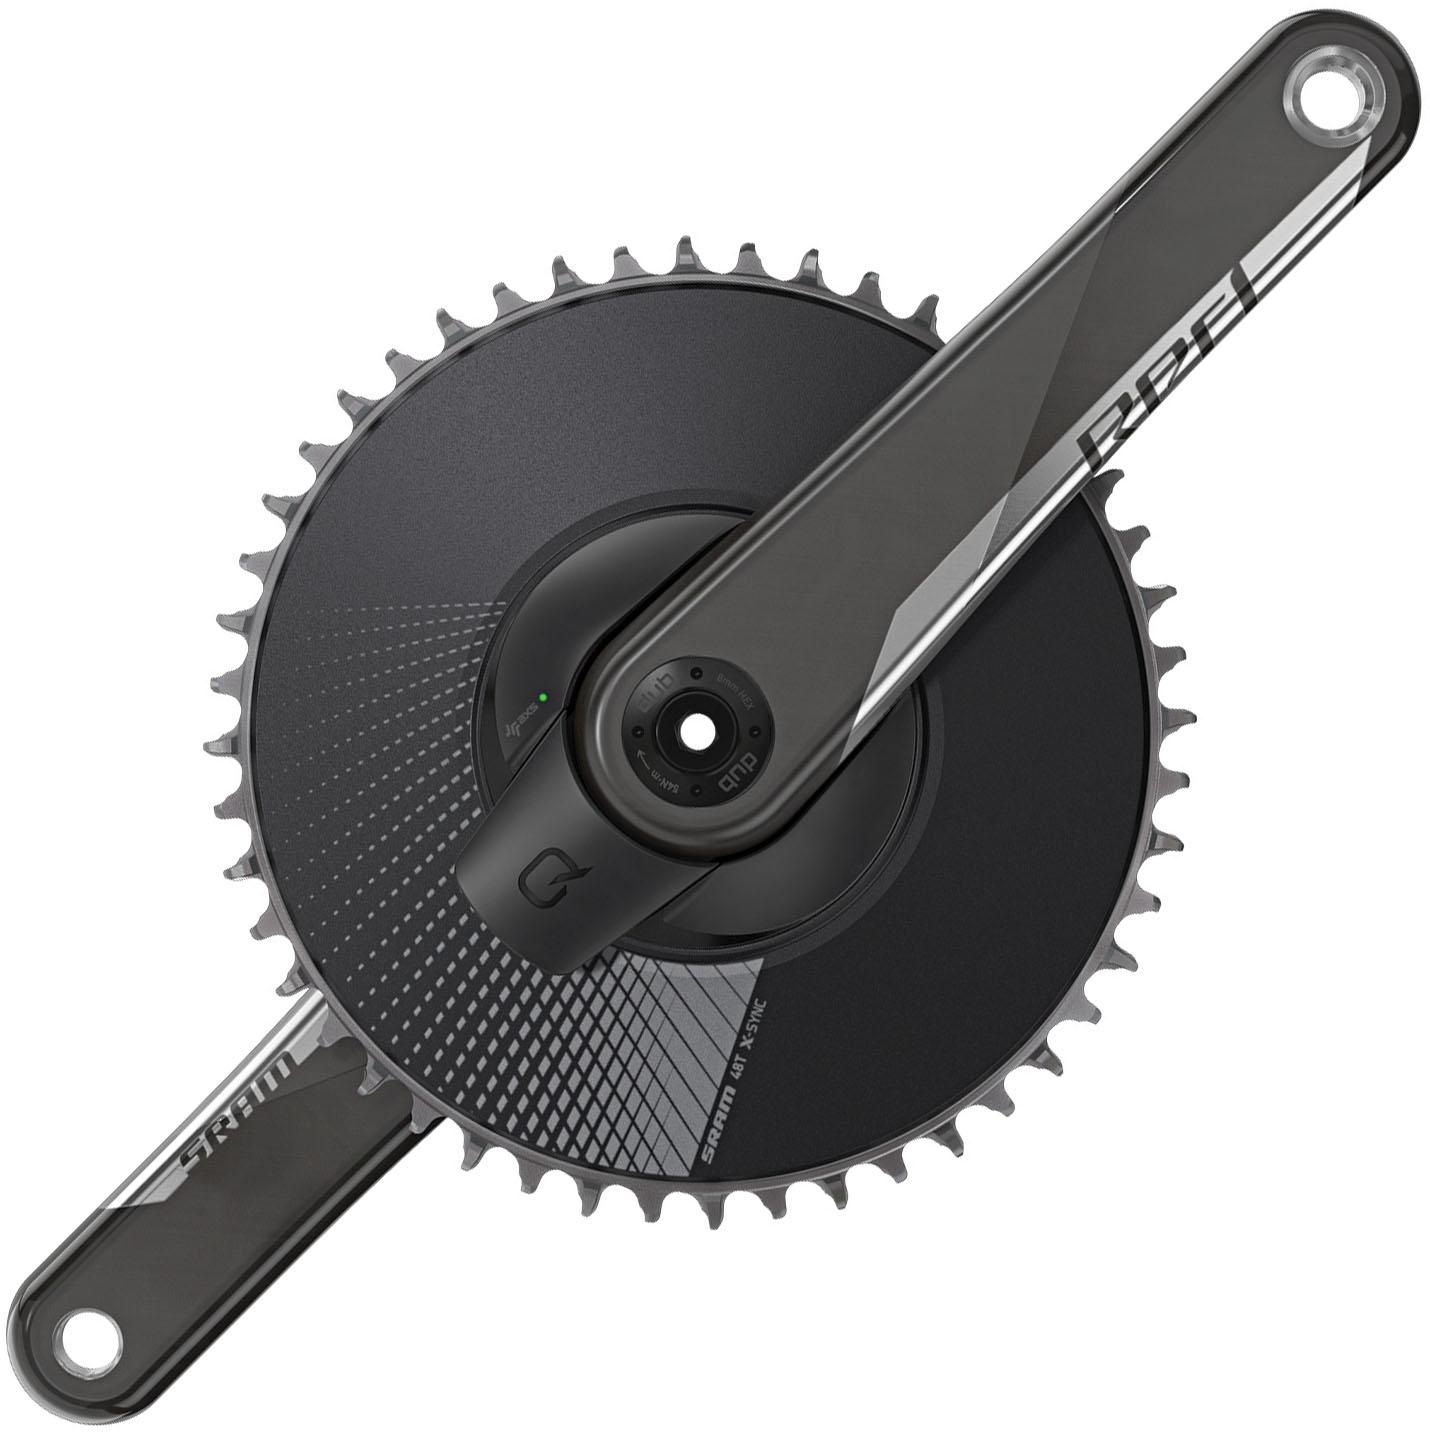 Sram Red 1 Axs Road Power Meter Chainset  Black